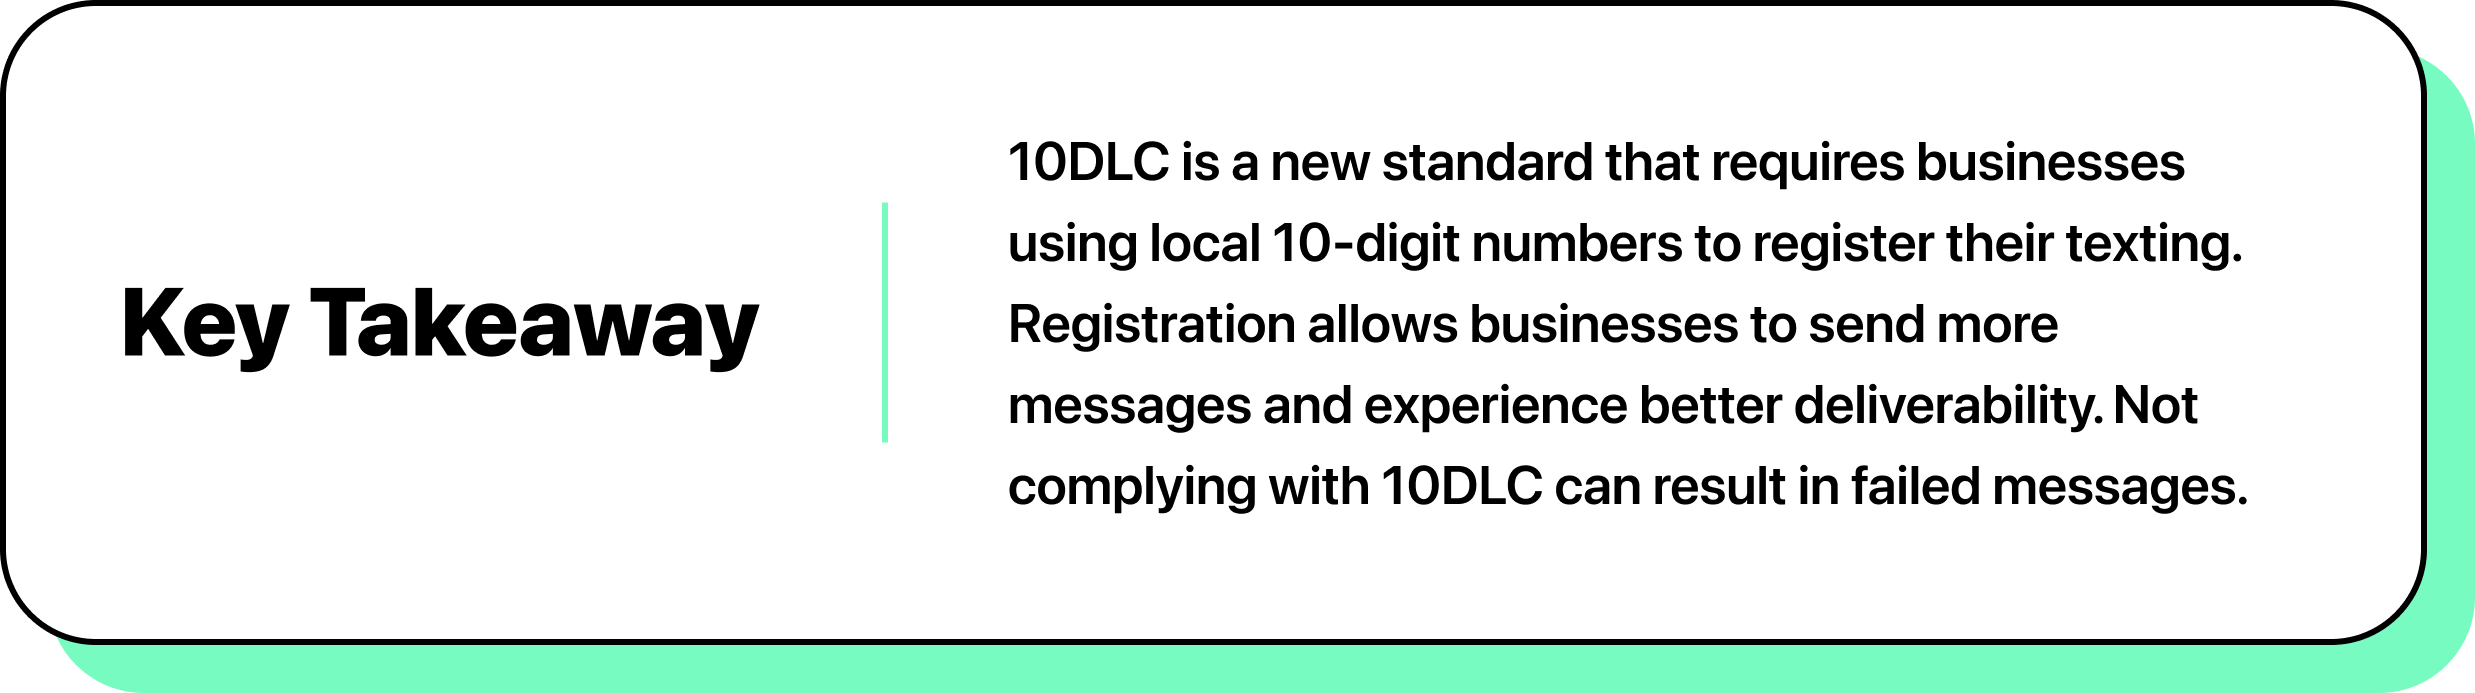 10DLC is a new standard that requires businesses to register their texting traffic with carriers. In return for sharing this information, businesses may send more messages and experience better deliverability. Not complying with 10DLC can result in failed messages.